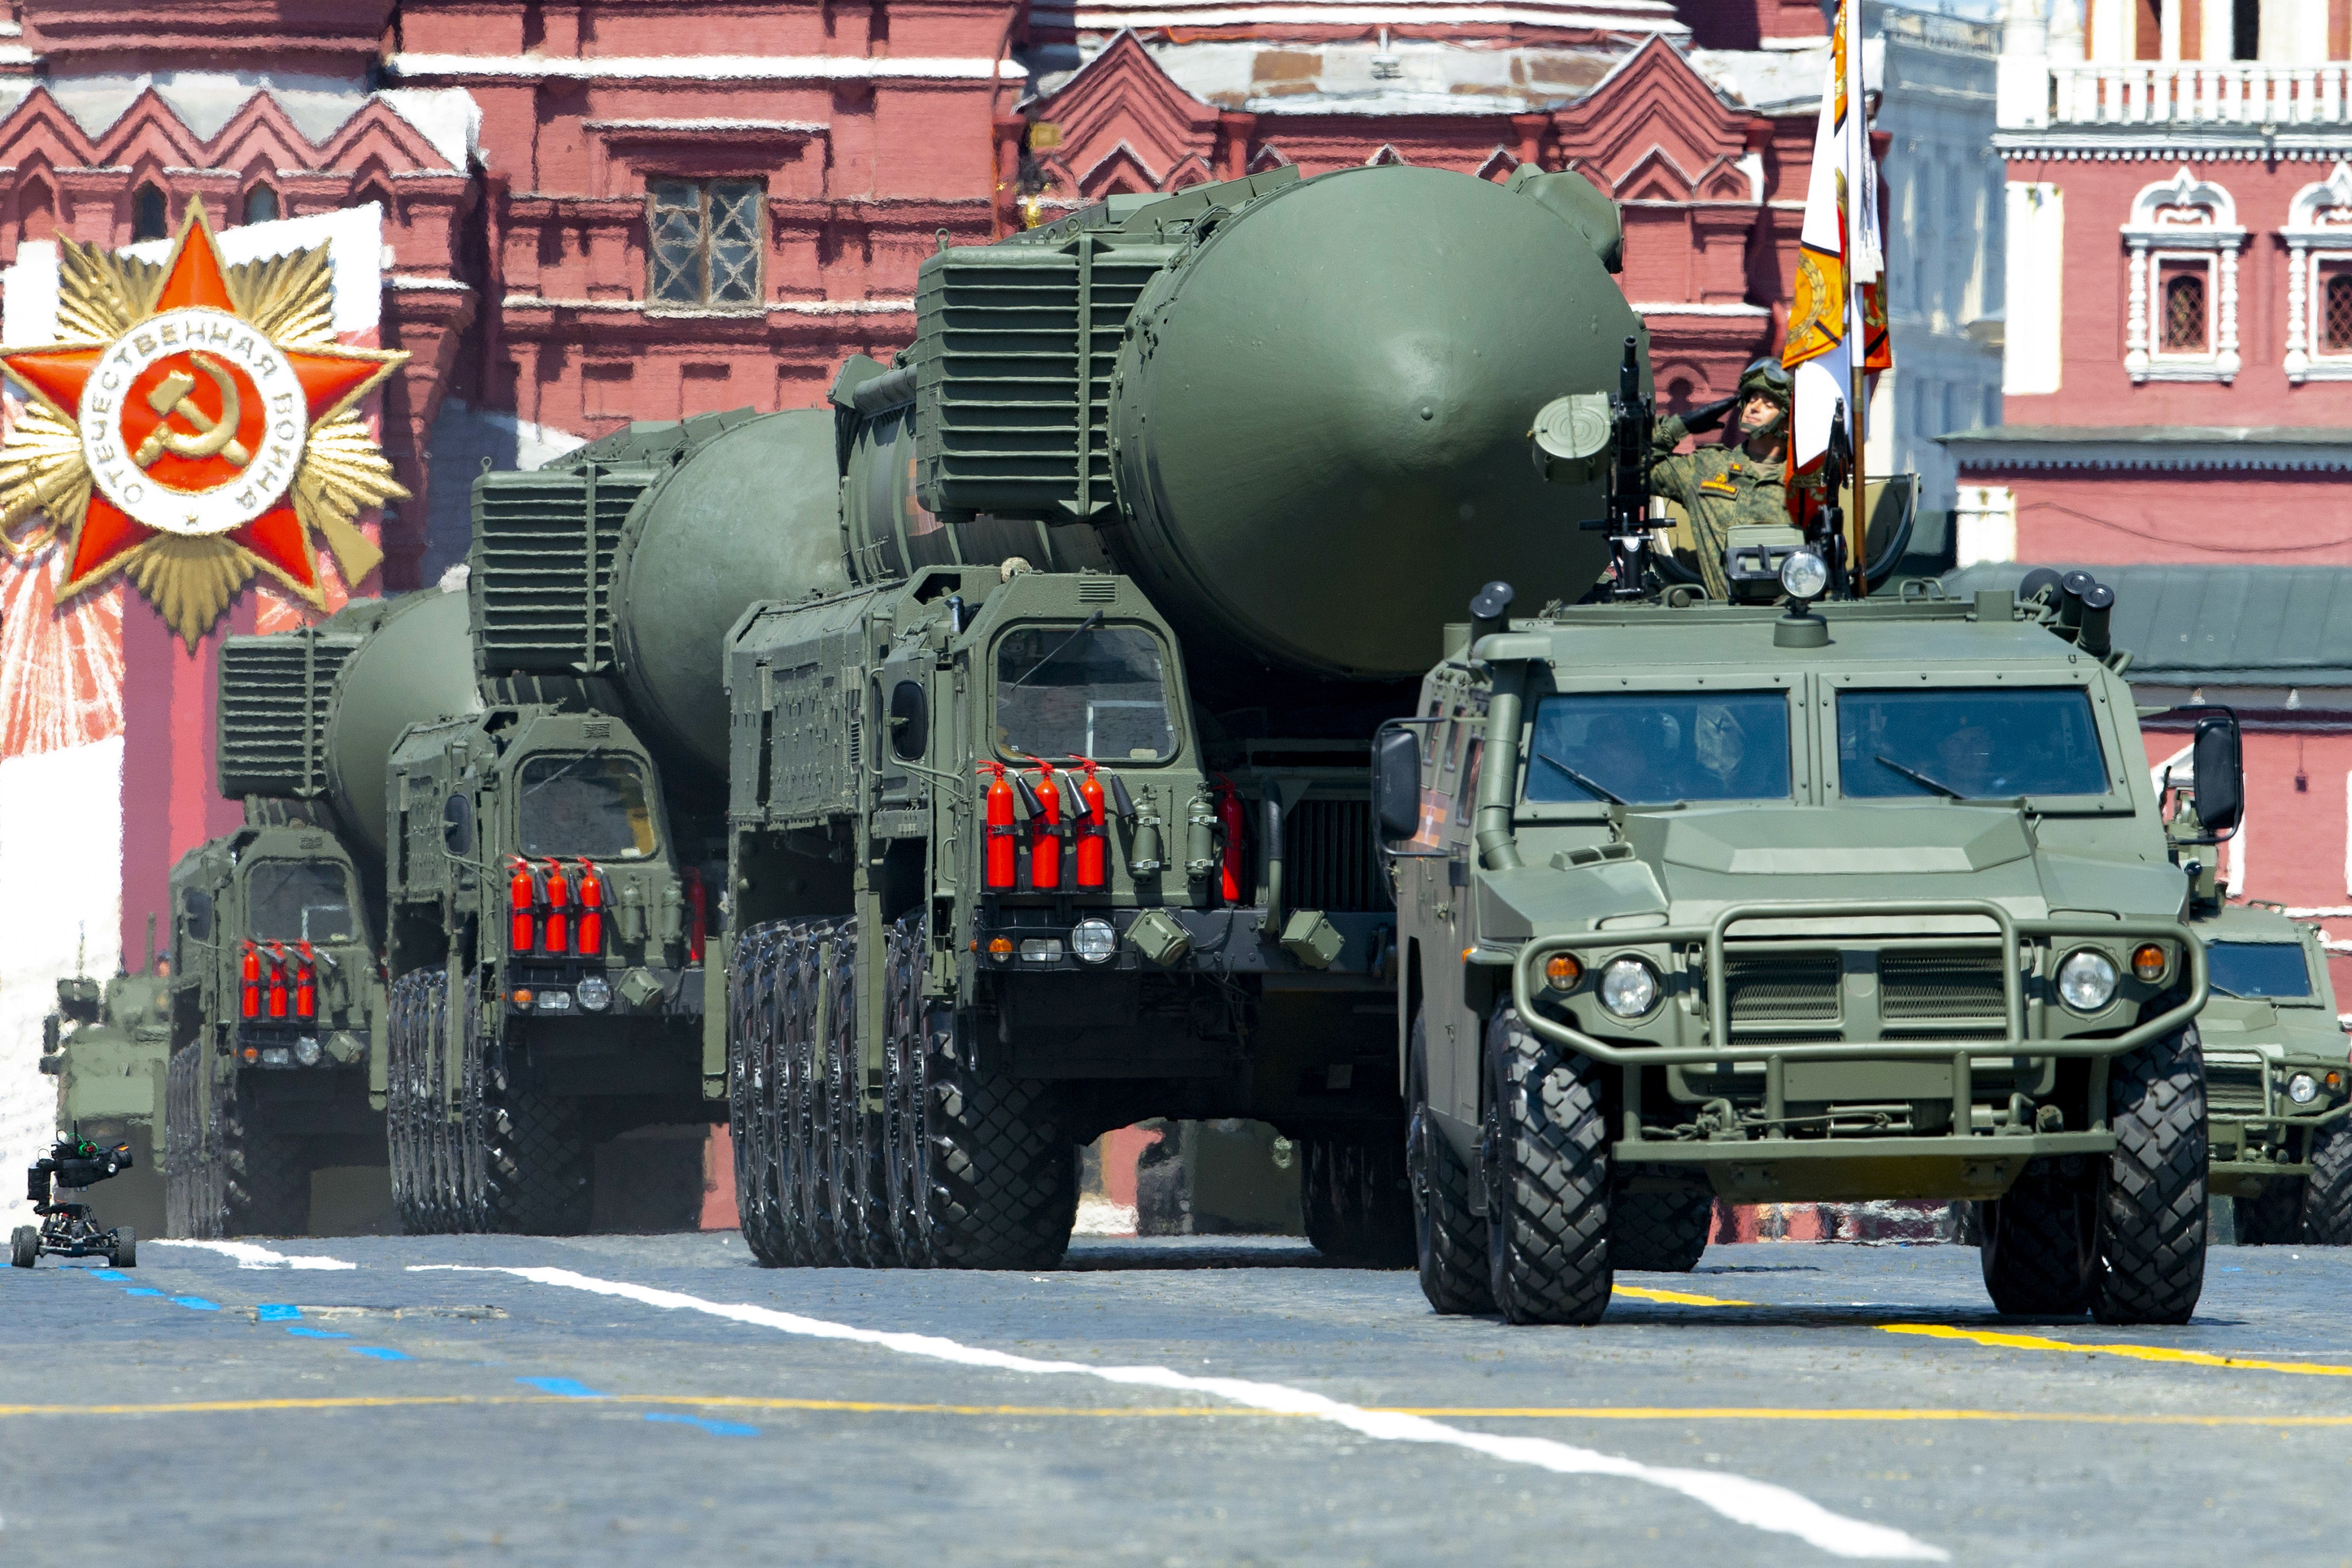 RS-24 Yars ballistic missiles roll into Red Square during the Victory Day parade marking the 75th anniversary of the Nazi defeat in Moscow, Russia on June 24, 2020. Months into the Ukraine war, Russian President Vladimir Putin has made more explicit threats than usual about nuclear weapons. Photo: AP 